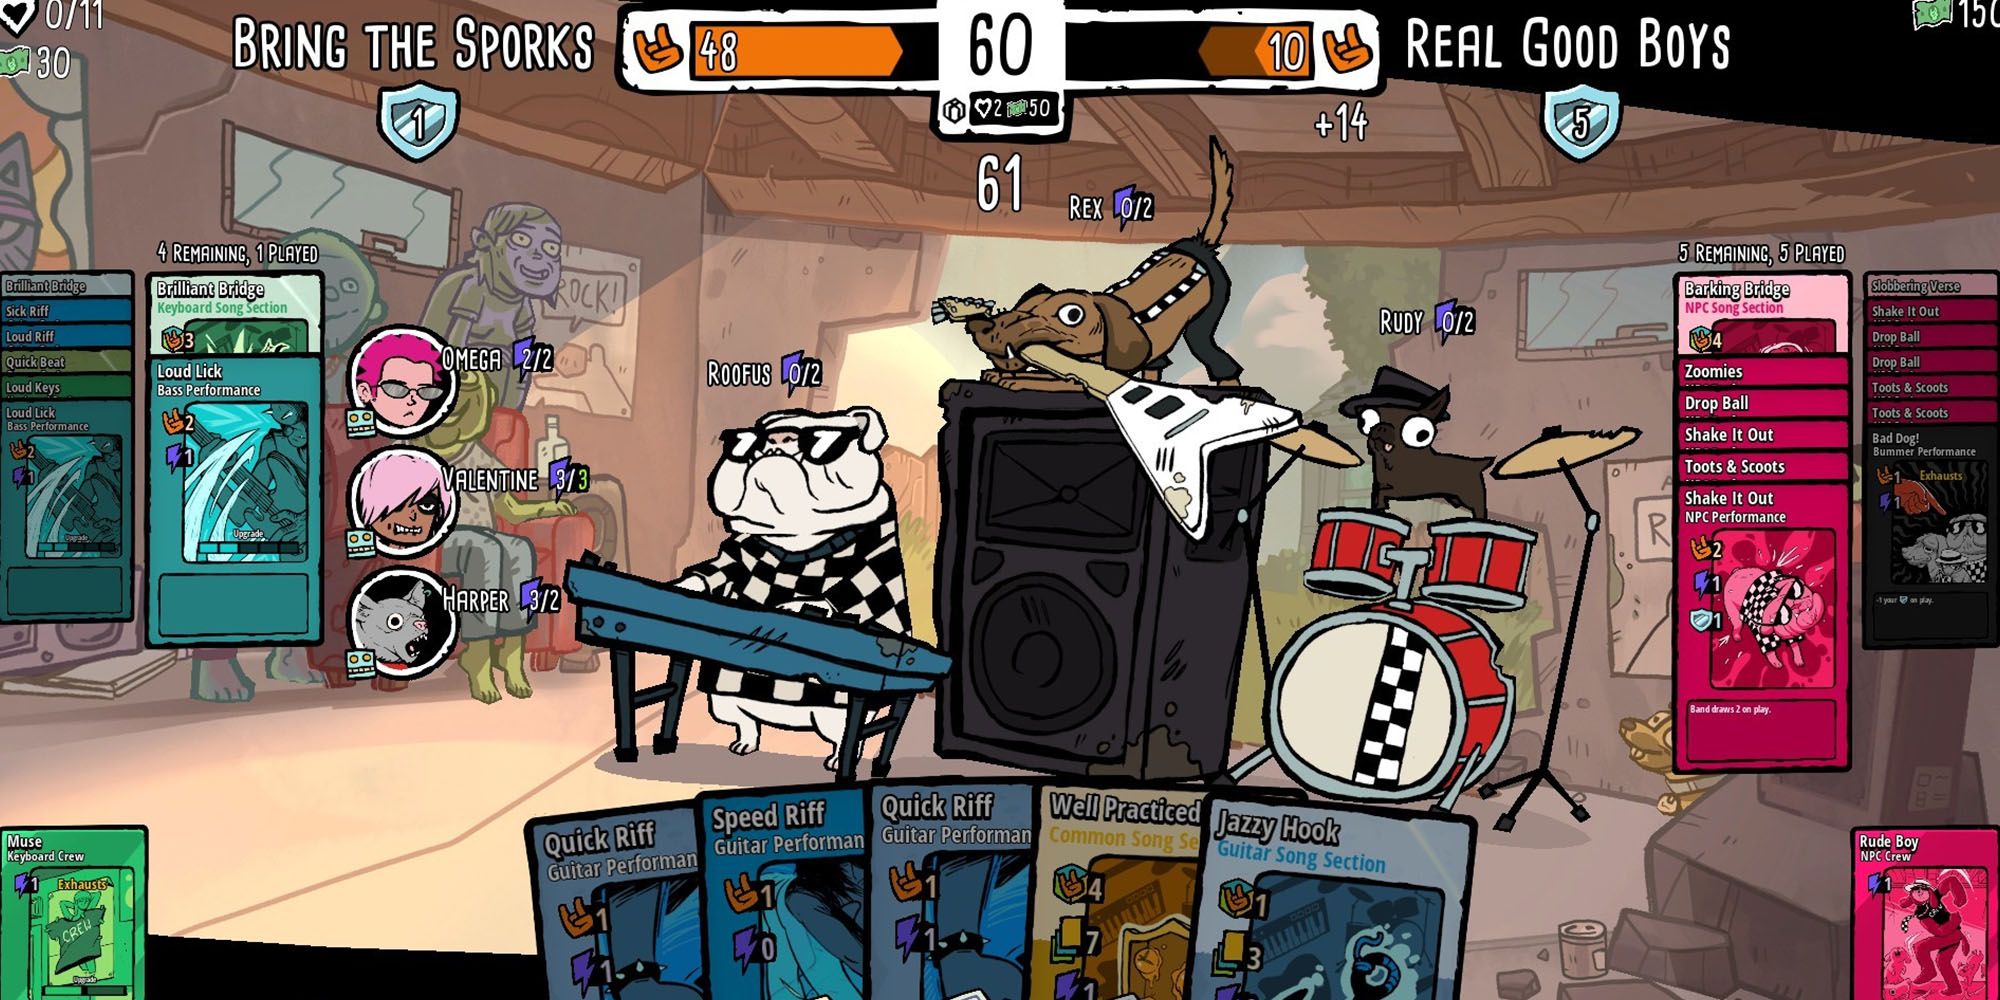 Battle Bands Rock And Roll Deckbuilder - A Screencap Mid Band Battle Showing All The UI Elements